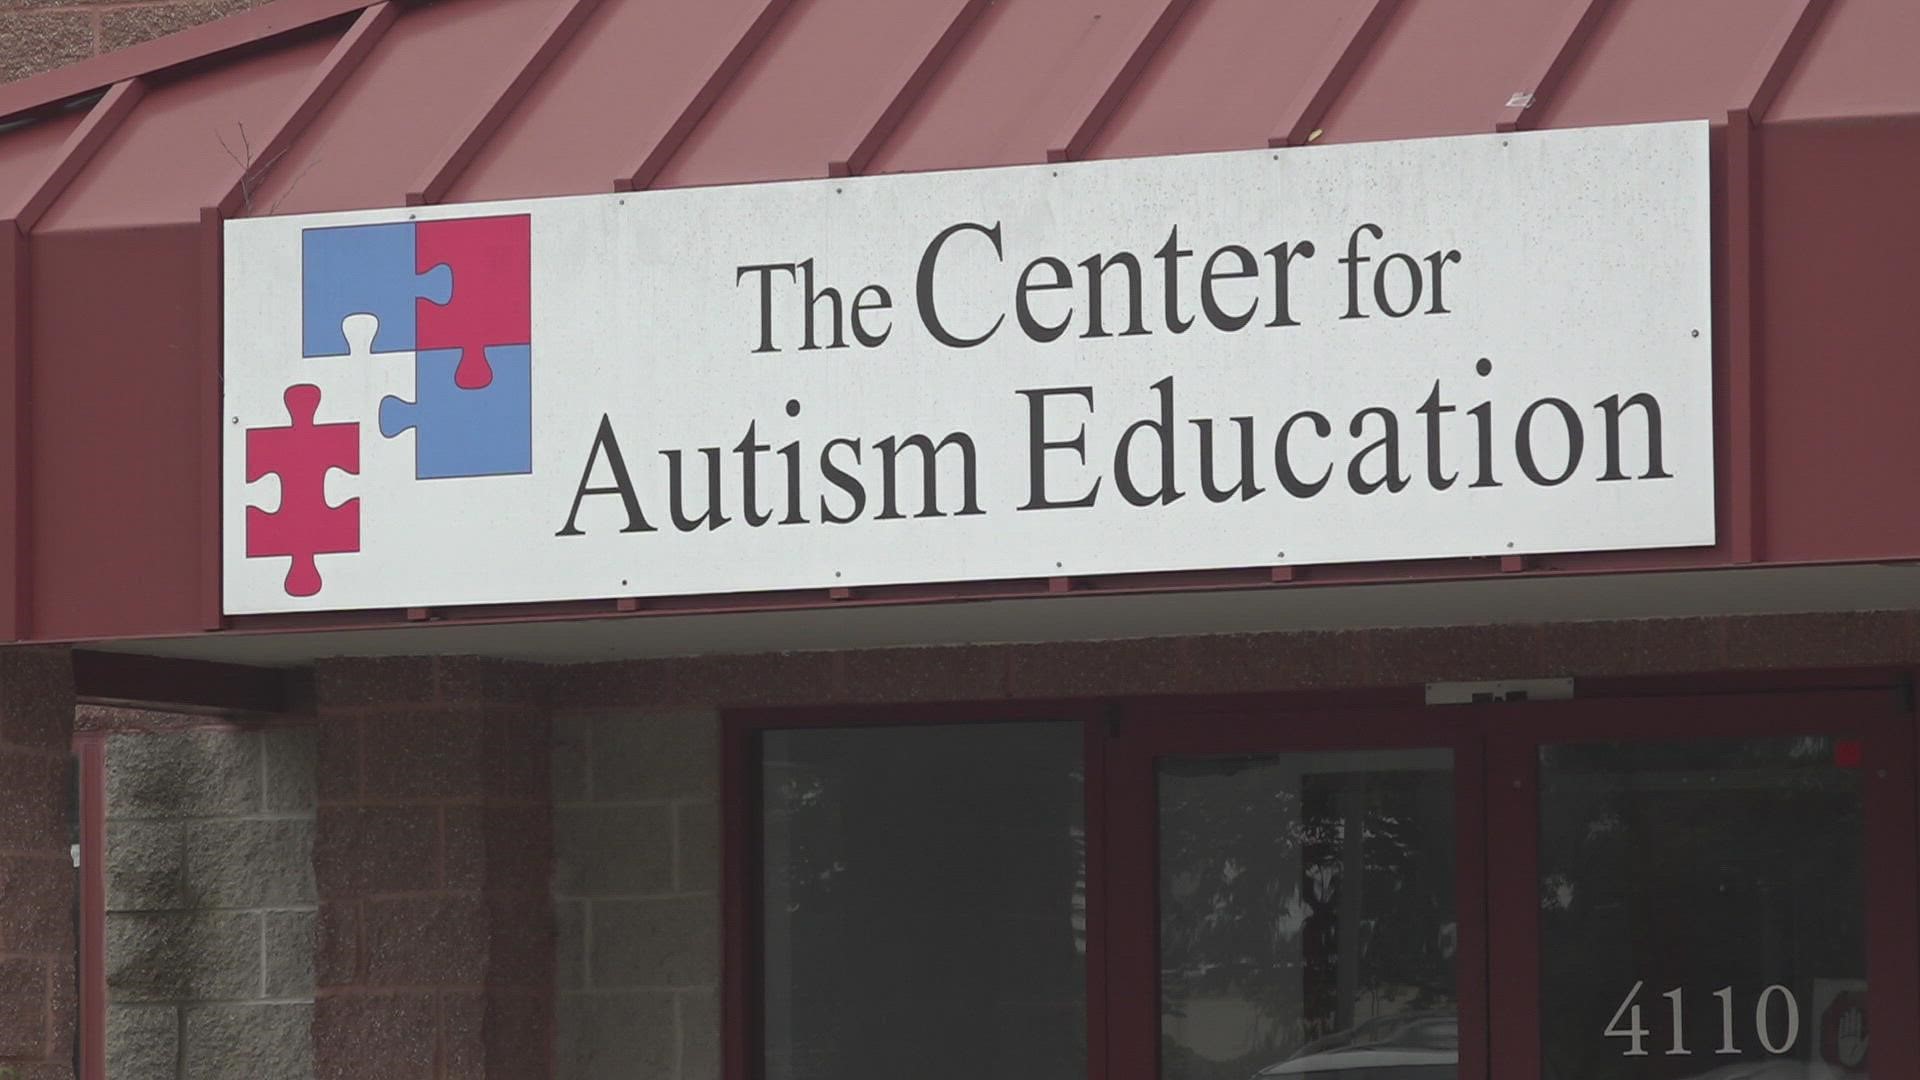 Floodwaters left the Center for Autism Education with about $50,000 worth of damage, and school is set to start next week.